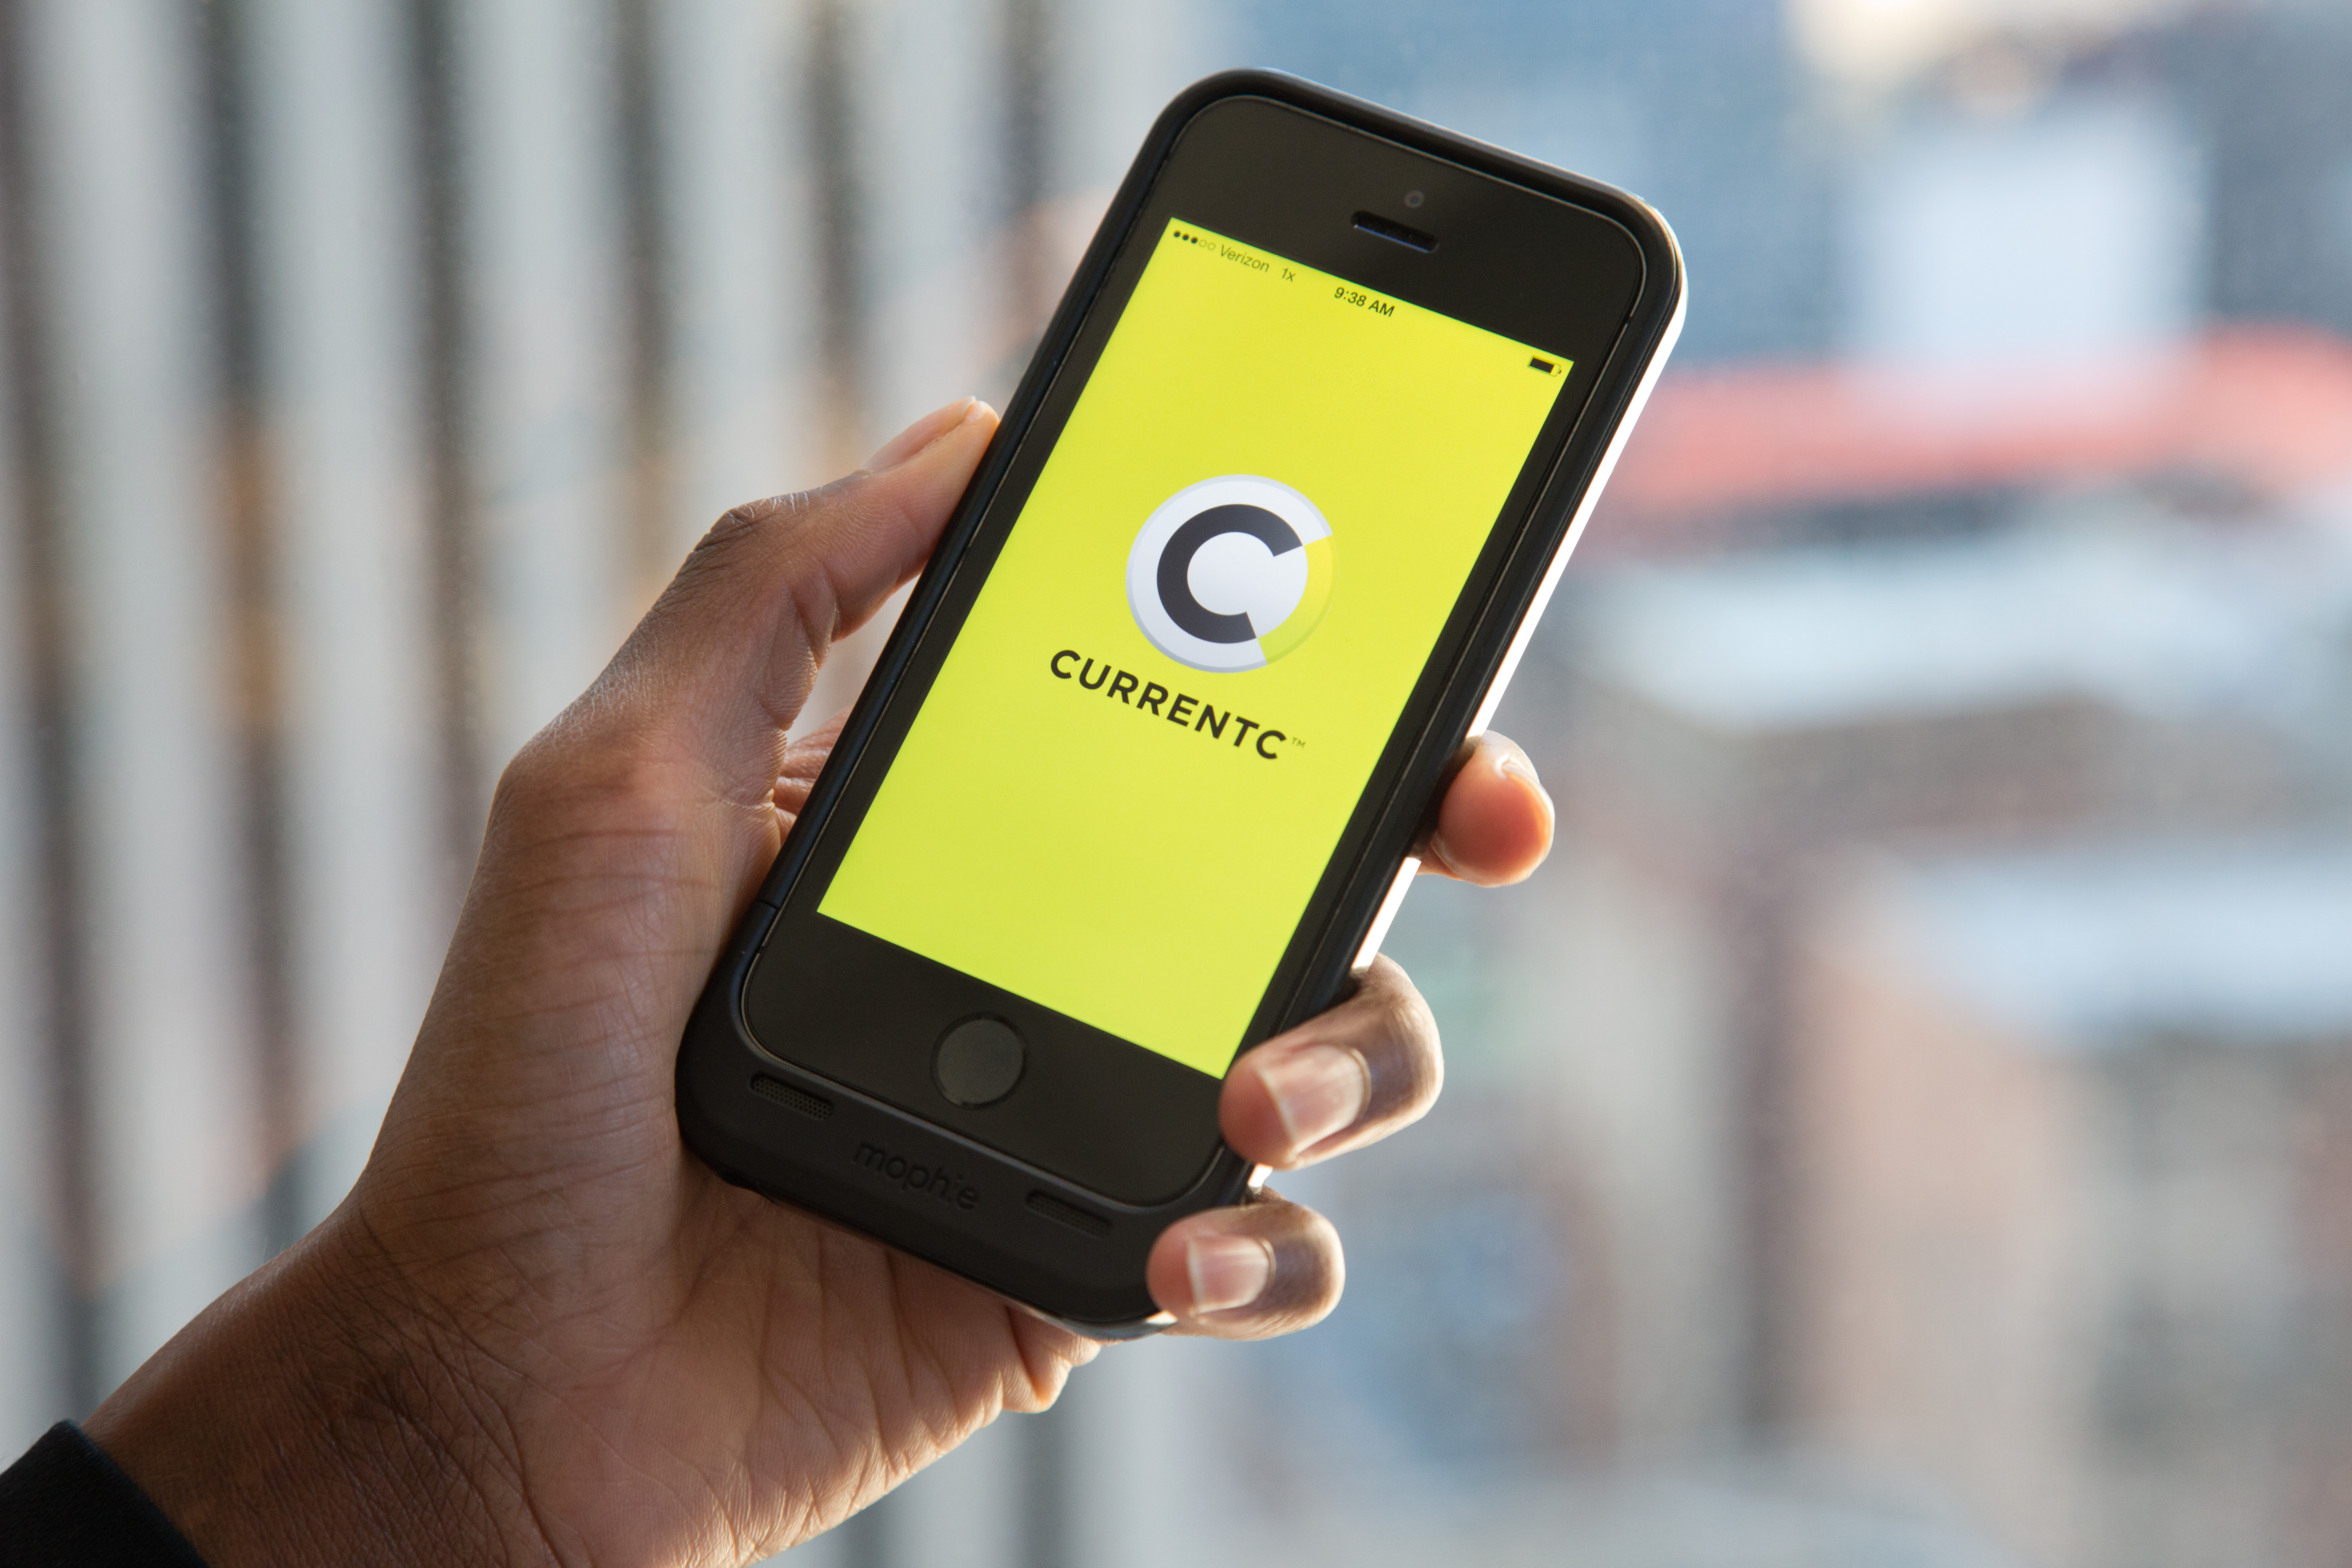 CurrentC app on mobile phone